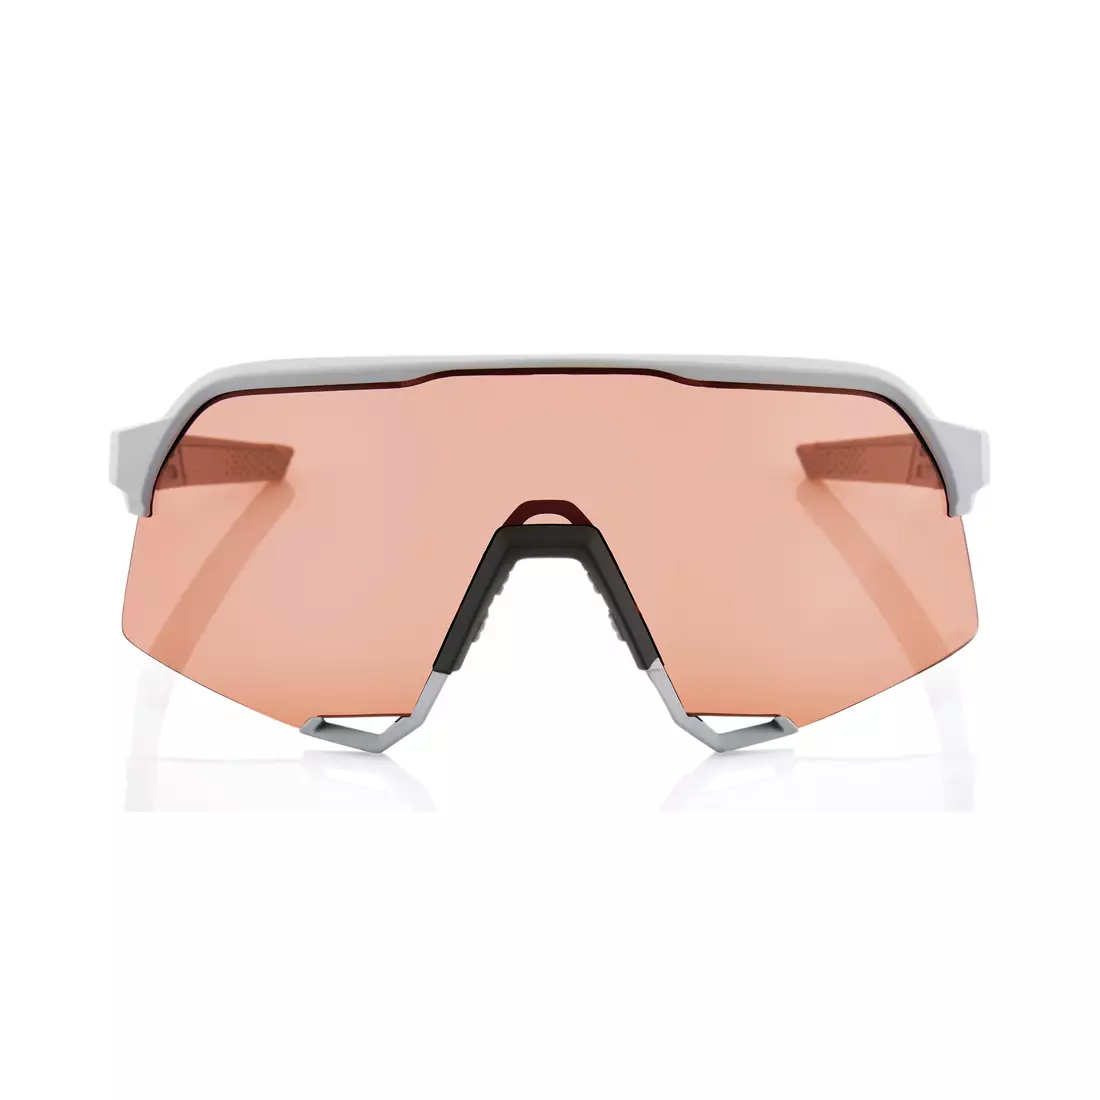 100% Sportbrille S3 (HiPER Coral Lens) Soft Tact Stone Grey STO-61034-424-01